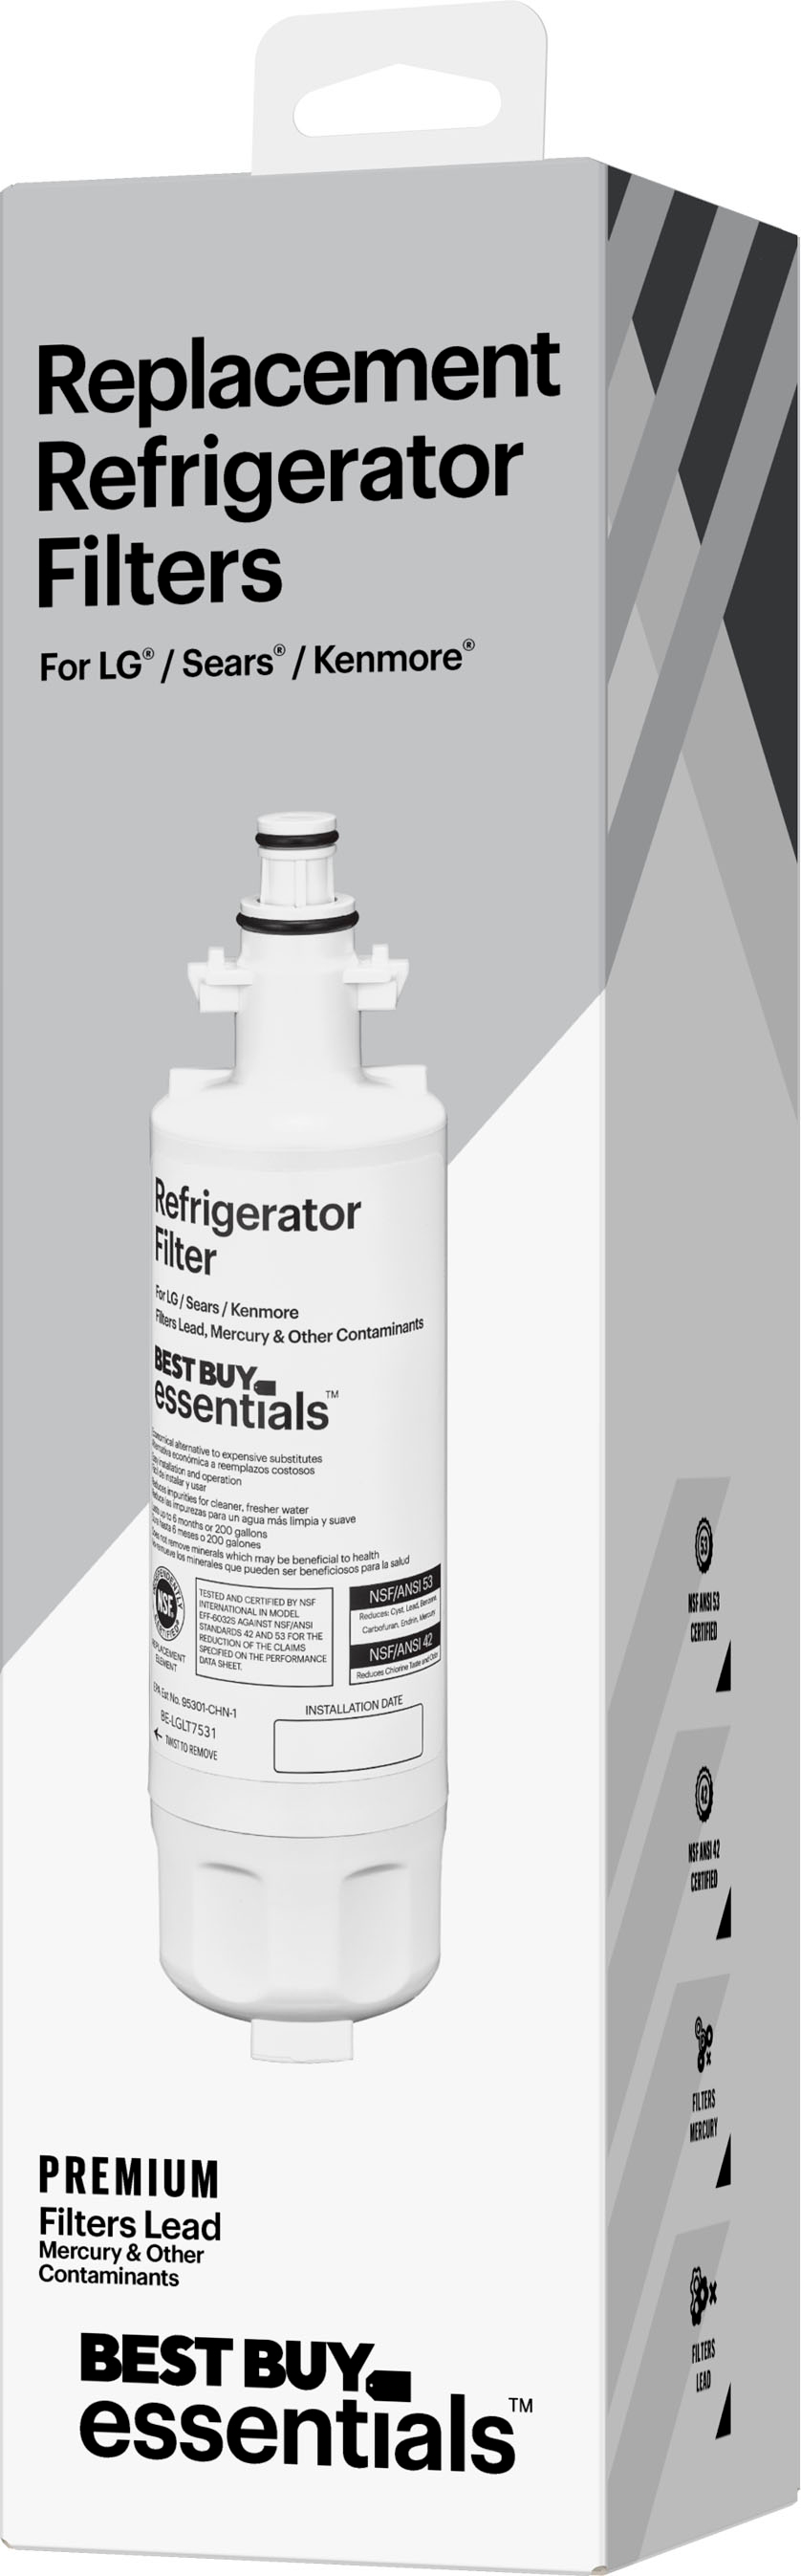 Best Buy essentials™ NSF 42/53 Water Filter Replacement for Select Samsung  Refrigerators White BE-SSDA531 - Best Buy